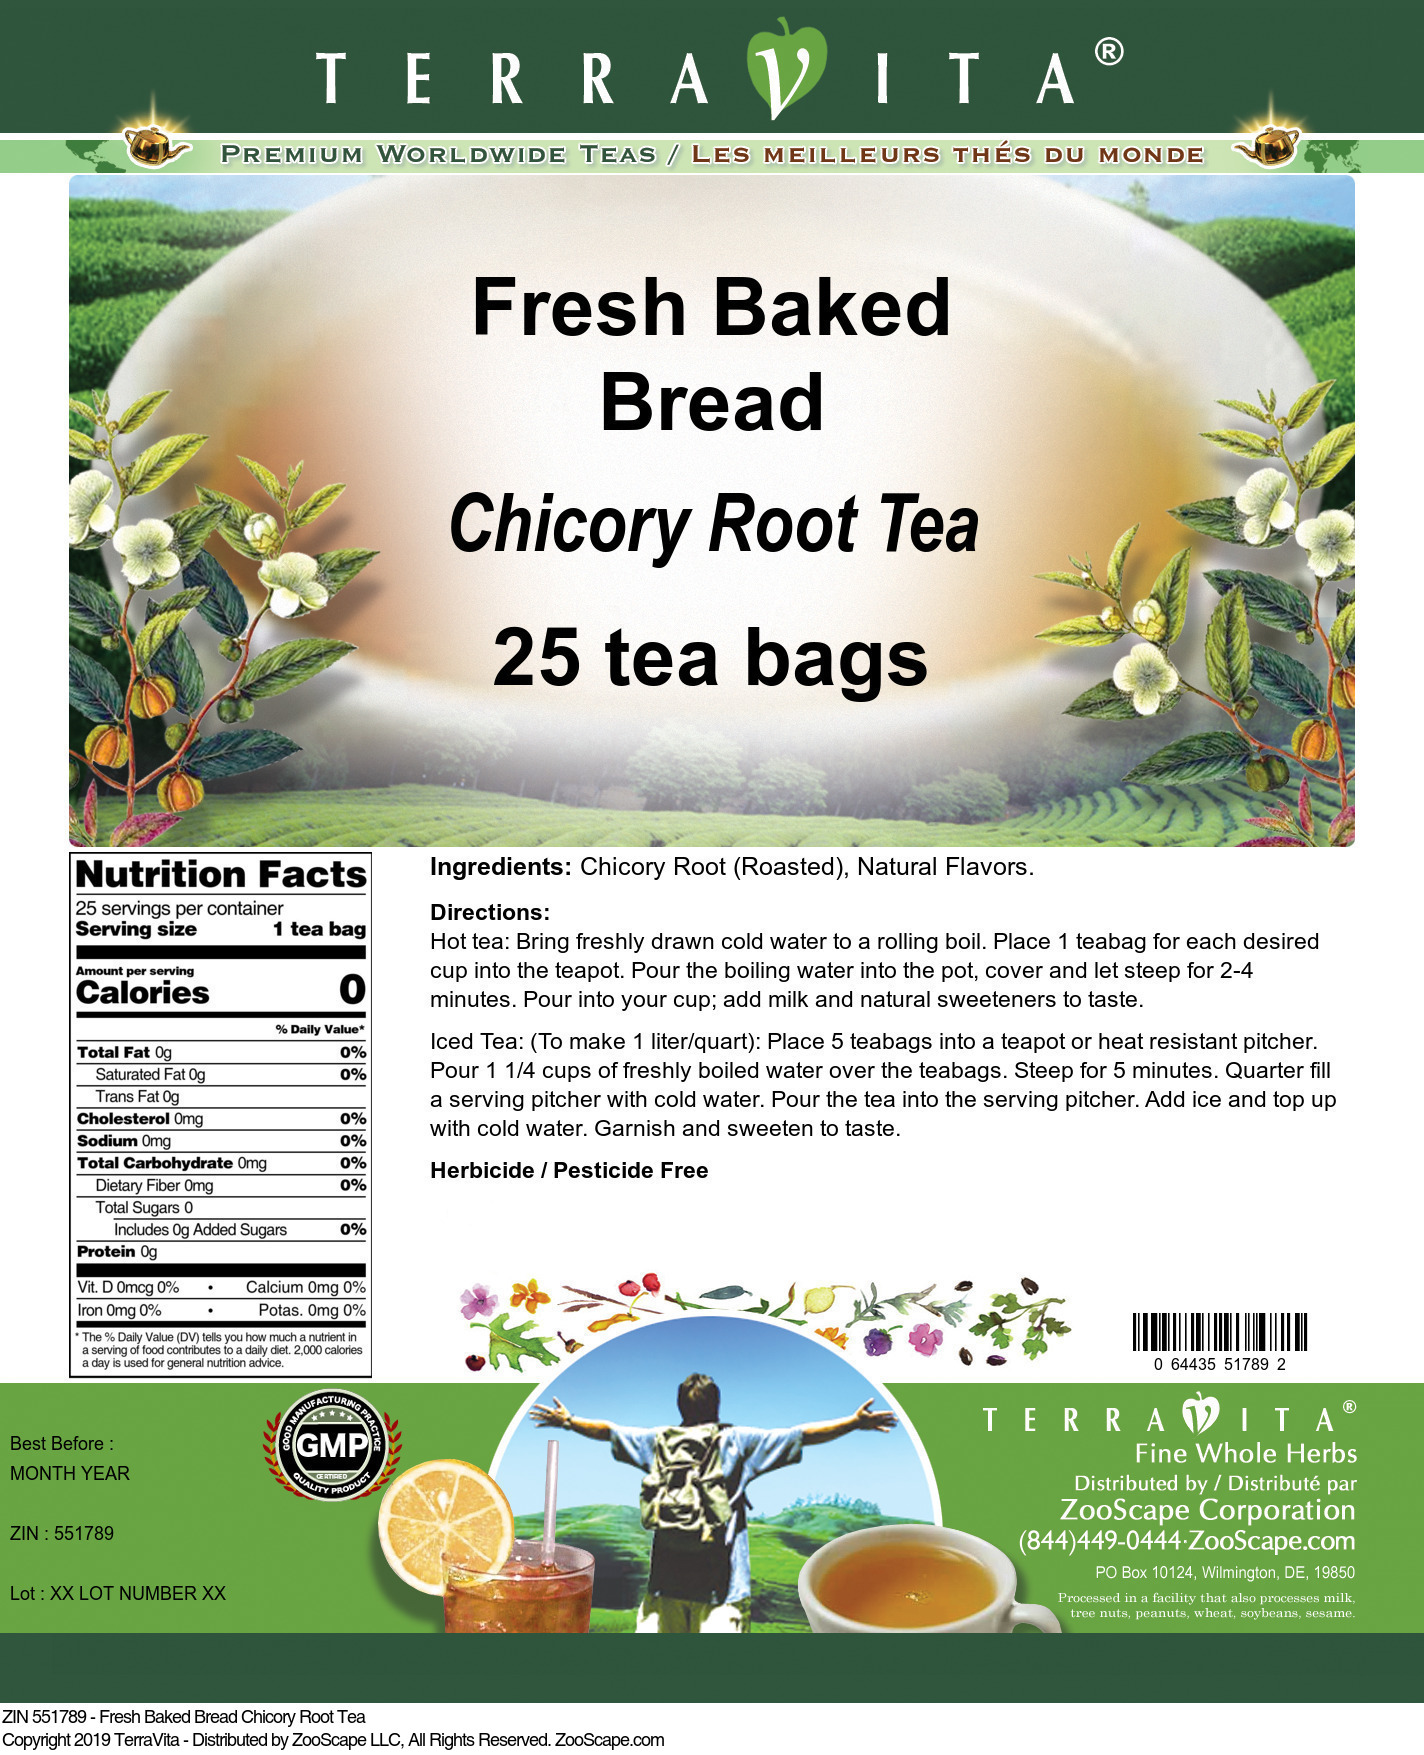 Fresh Baked Bread Chicory Root Tea - Label